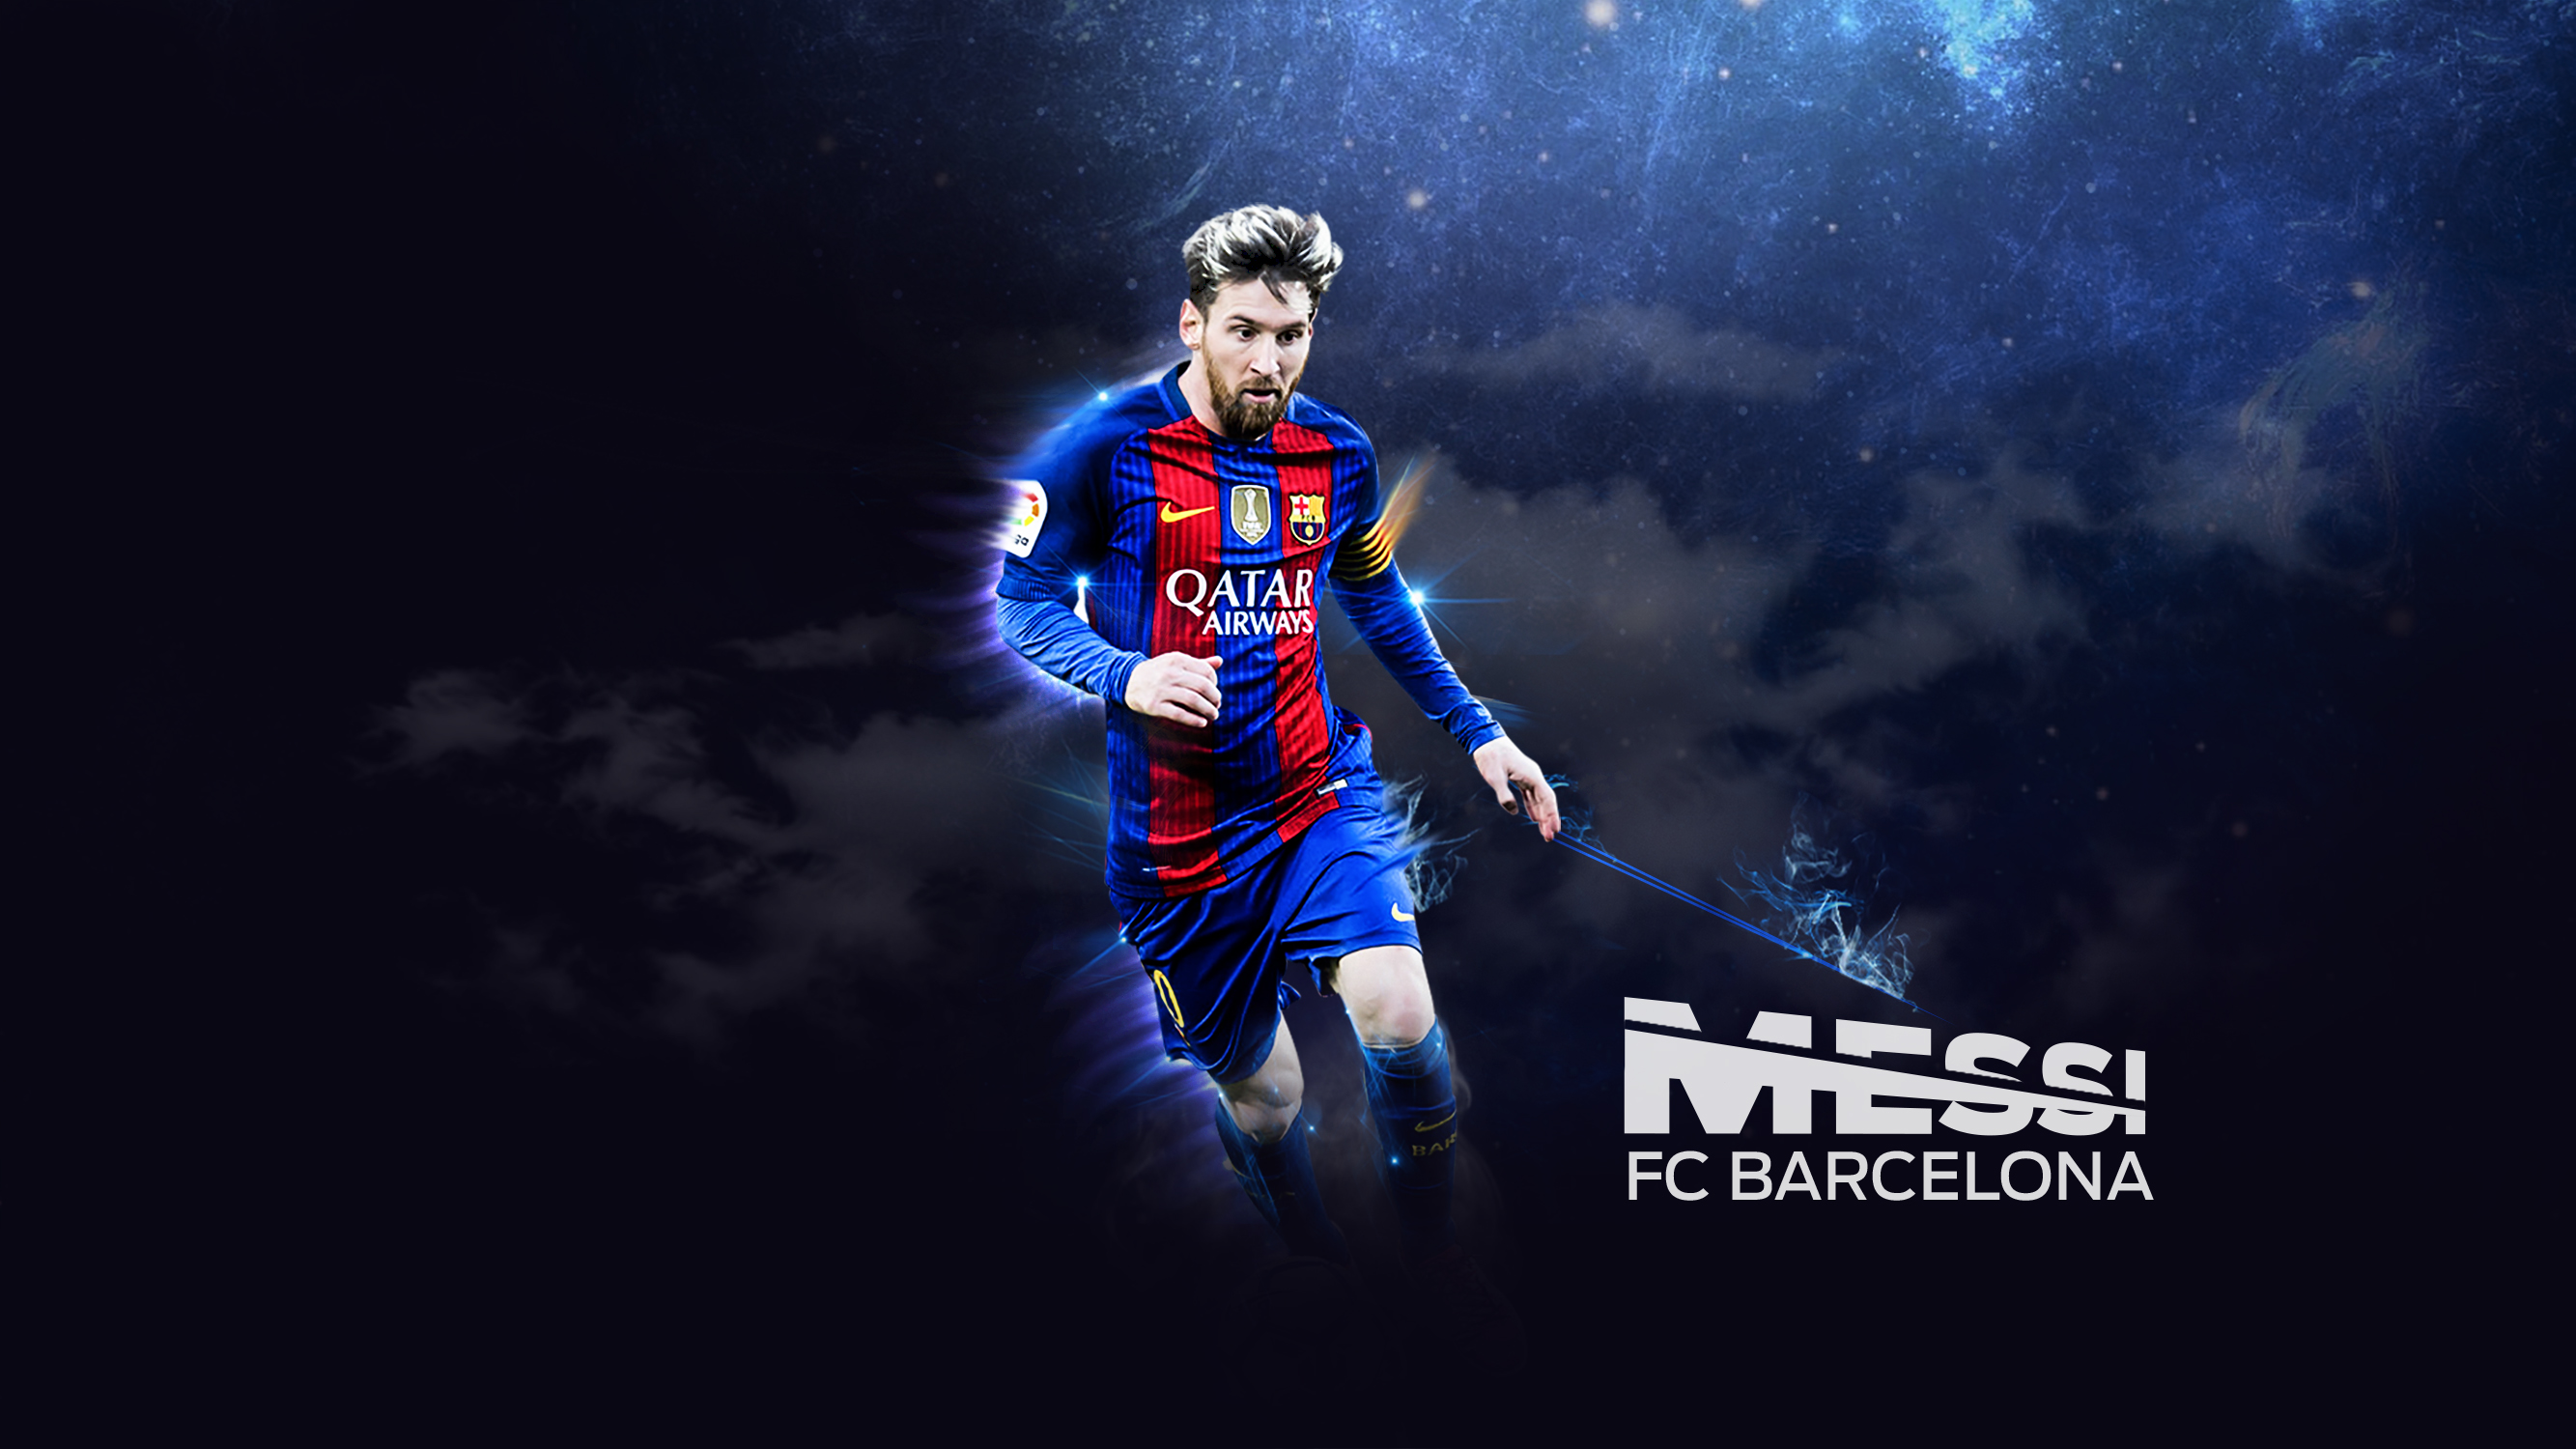 Free Download Best 20 Lionel Messi Hd Wallpapers Nsf Music Station 2667x1500 For Your Desktop Mobile Tablet Explore 25 Leo Messi 2019 Wallpapers Leo Messi 2019 Wallpapers Leo Messi Wallpaper Leo Messi Wallpaper 2016